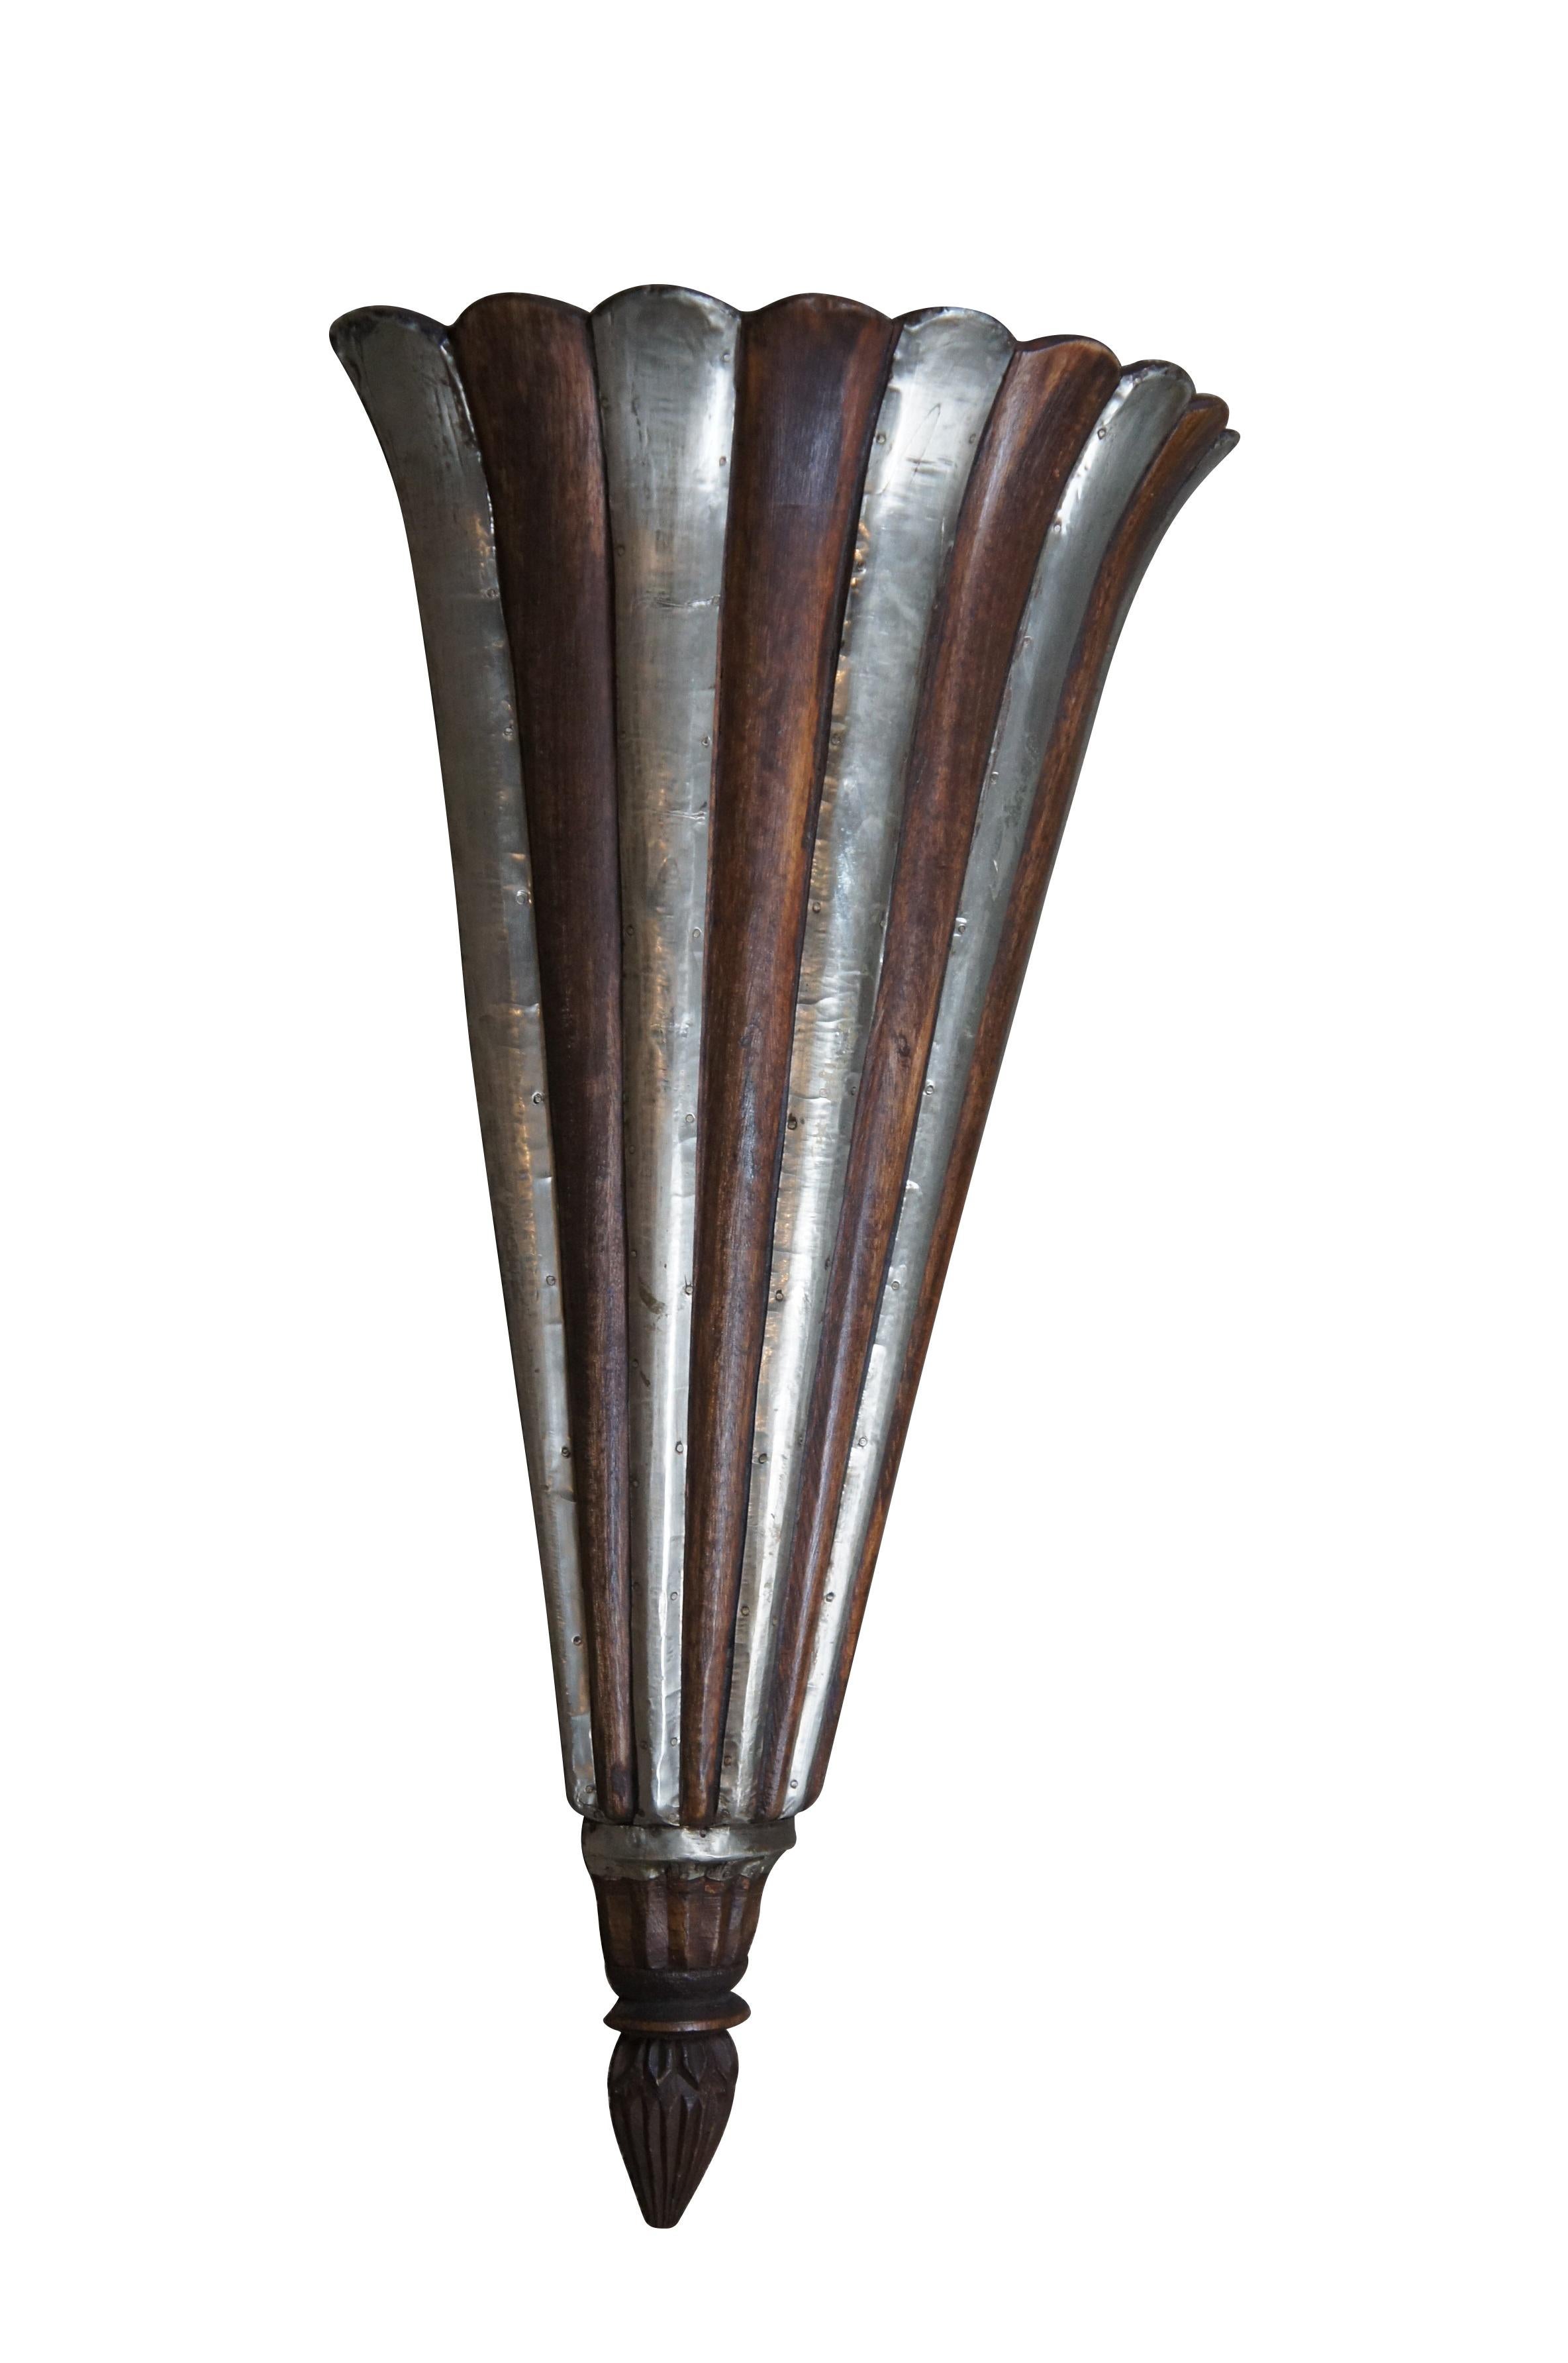 Mid to late 20th century wooden wall pocket / flower vase / sconce featuring a fluted torchiere design with scalloped edge, crafted of wood with alternating tin overlays.

Dimensions:
14